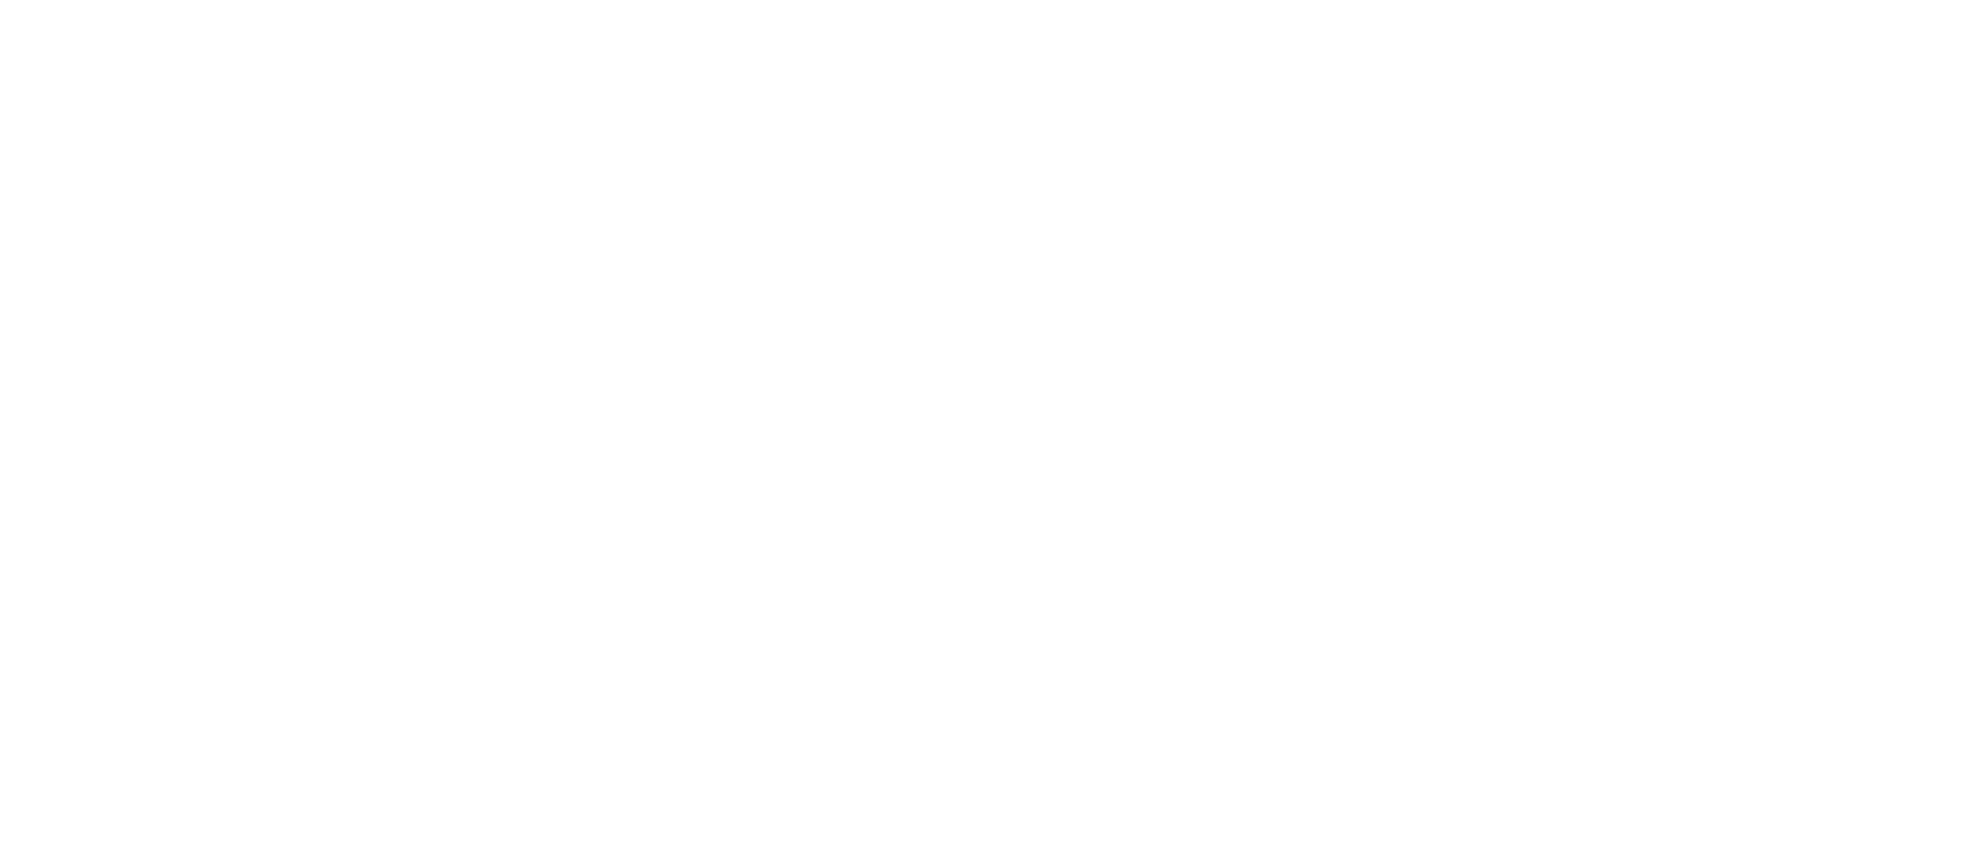 Analytics Lab – Conservation Science Partners